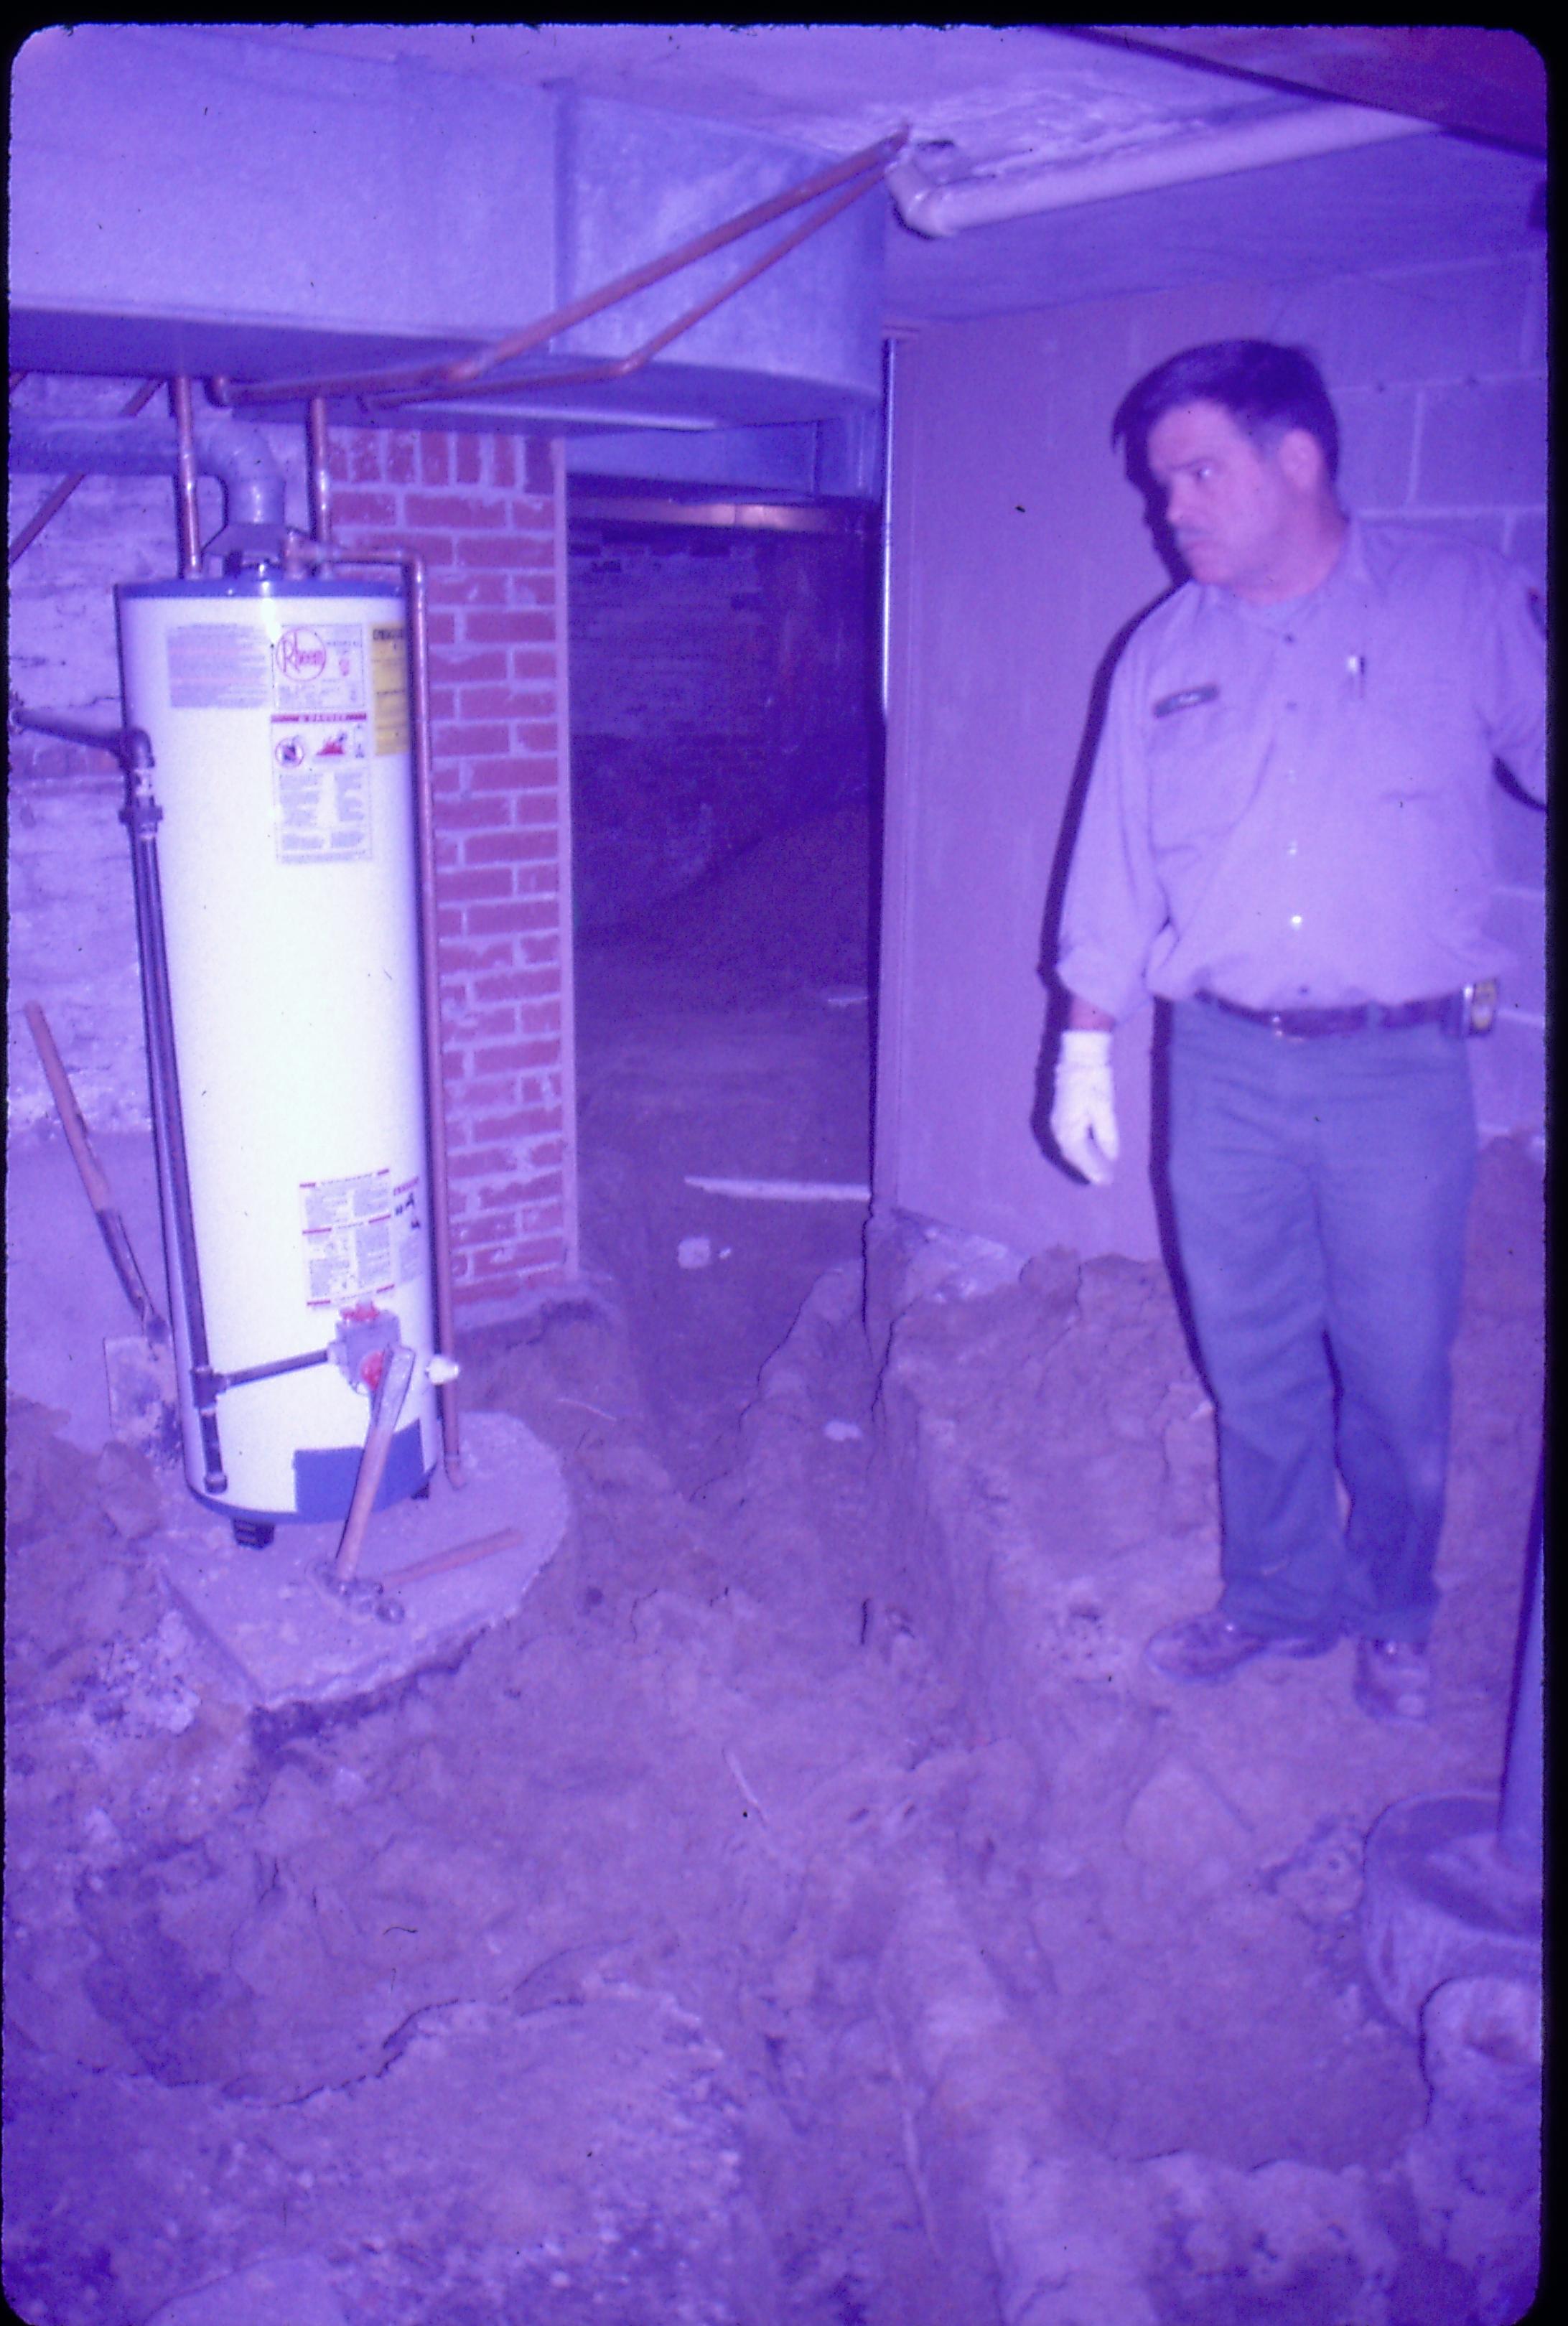 Lyon House - basement. Maintenance Worker Tom Pacha checks on water heater while digging up old plumbing pipes in dirt floor. Modern PVC pipe seen in background through doorway. Duct work on ceiling. Looking Southeast from furnace room in basement Lyon, Basement, water heater, staff, plumbing, cinder block, duct work